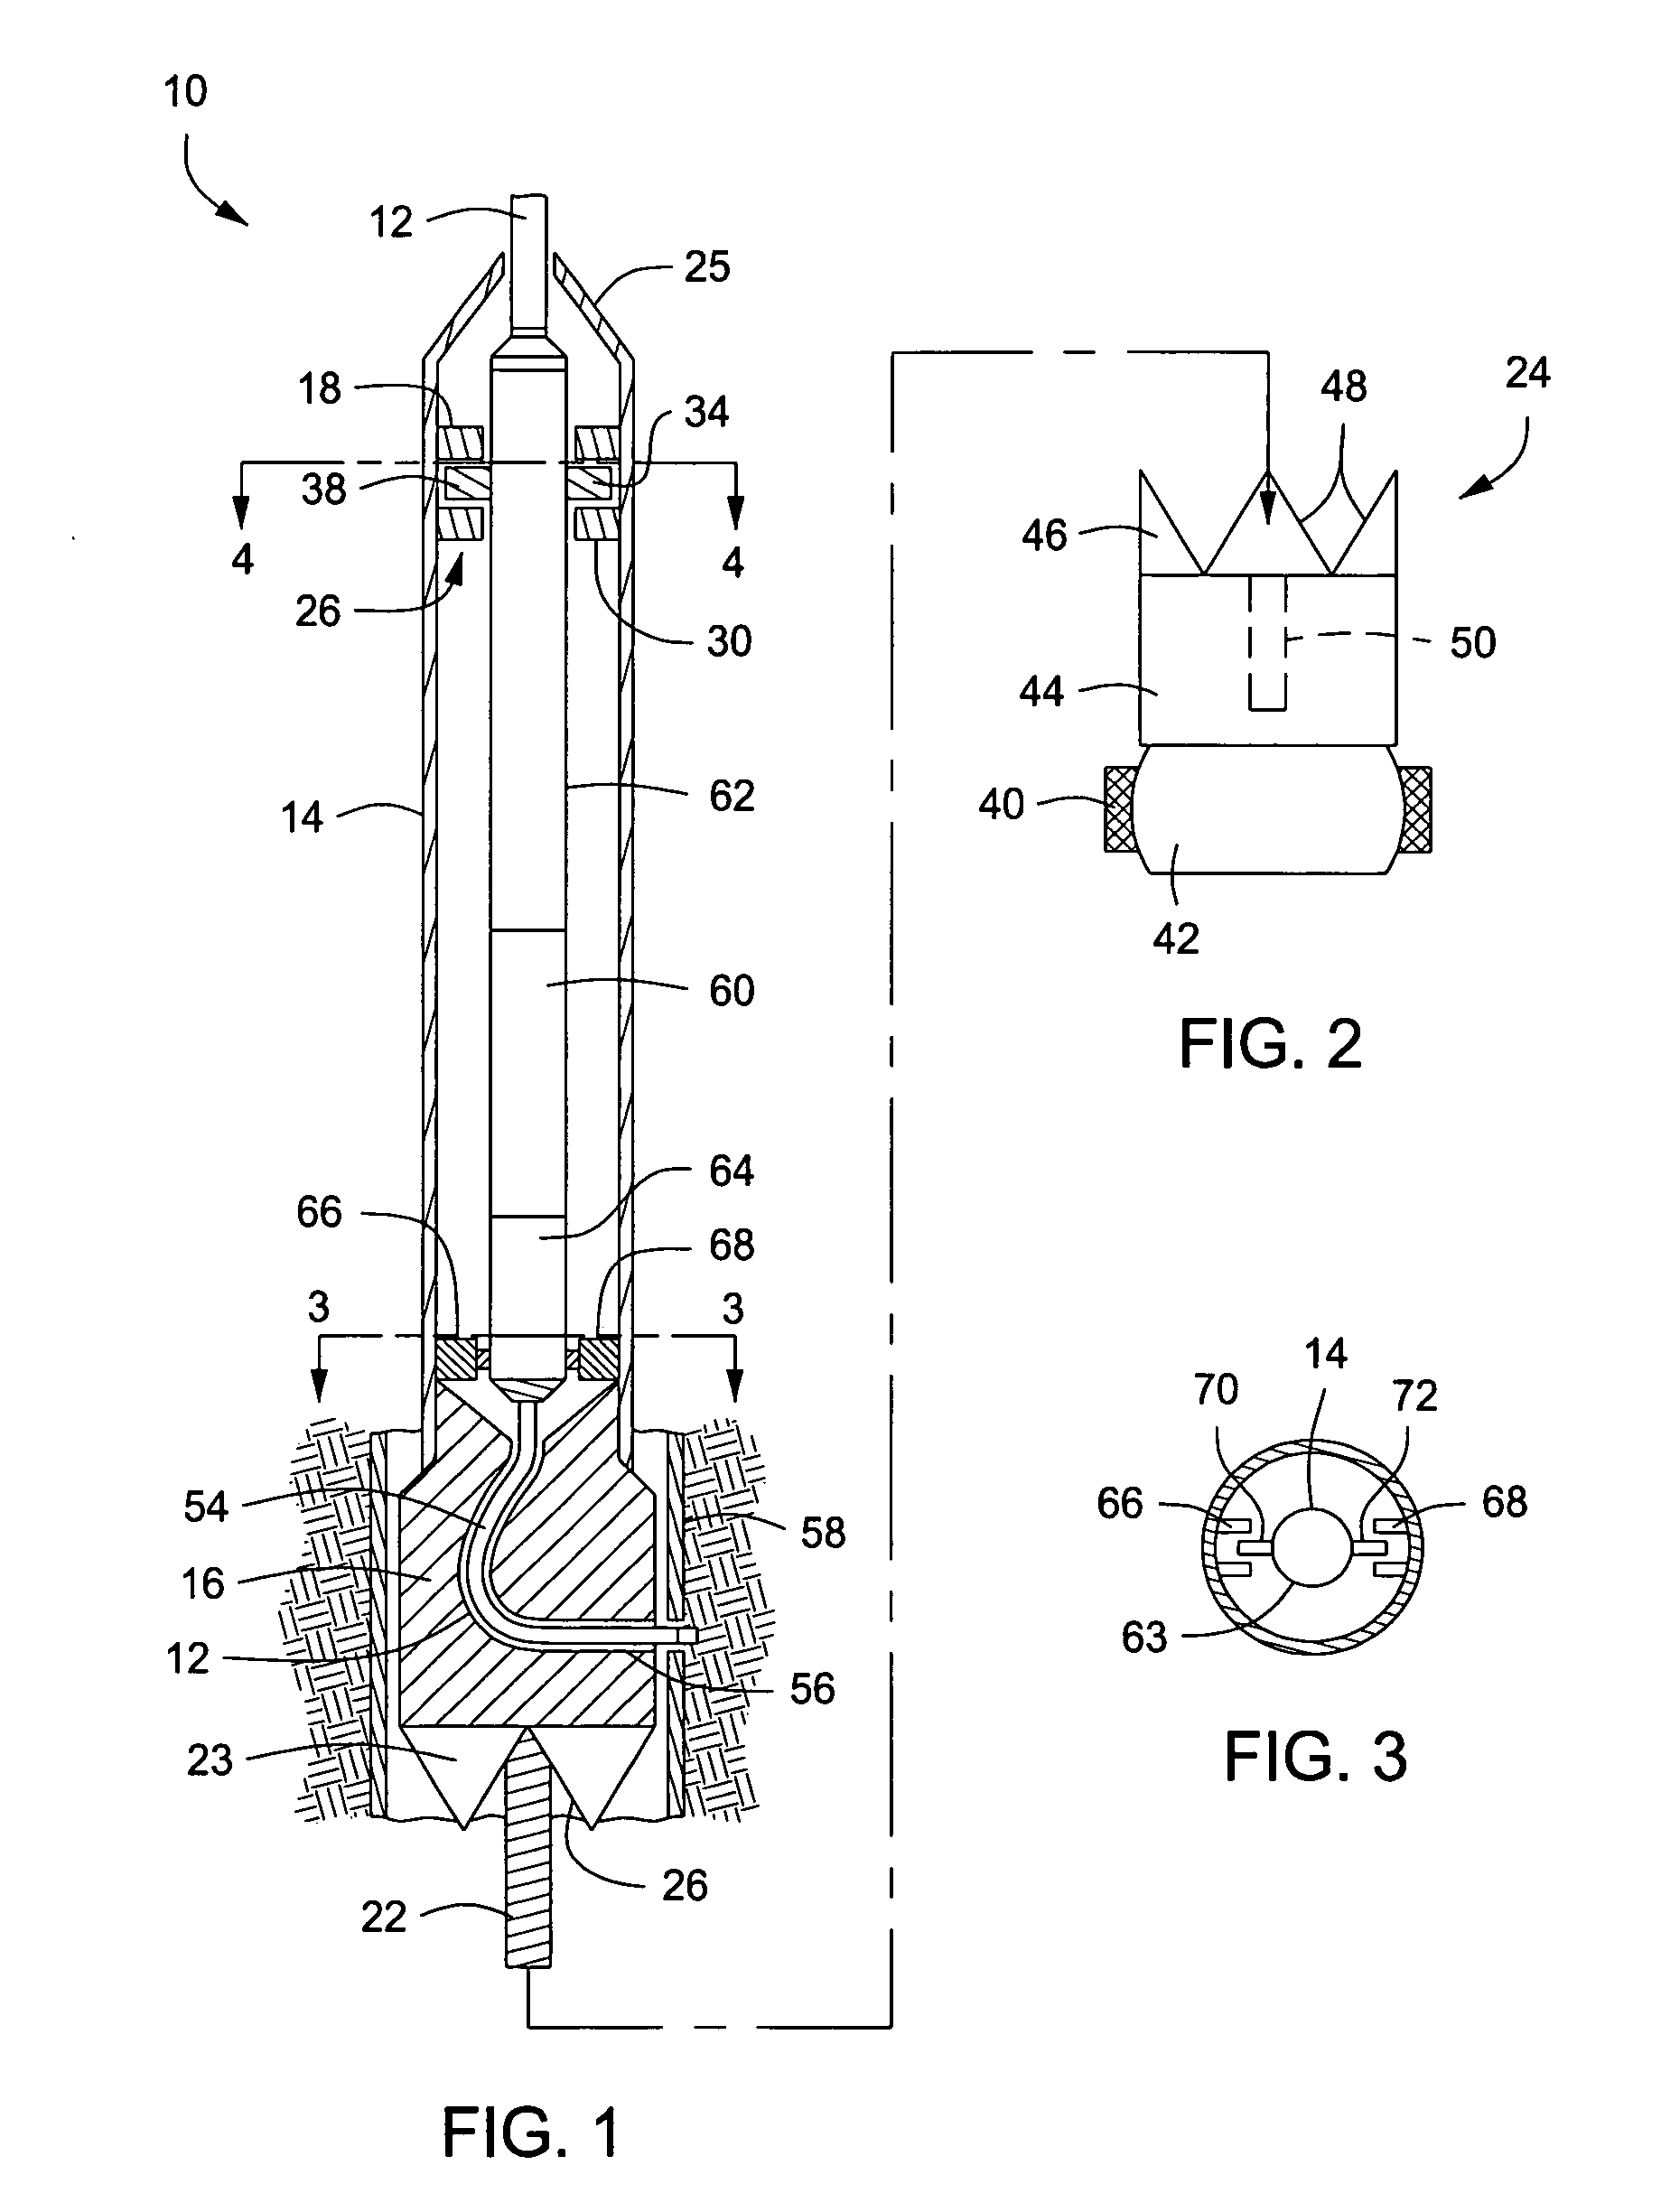 Method and apparatus for high pressure radial pulsed jetting of lateral passages from vertical to horizontal wellbores